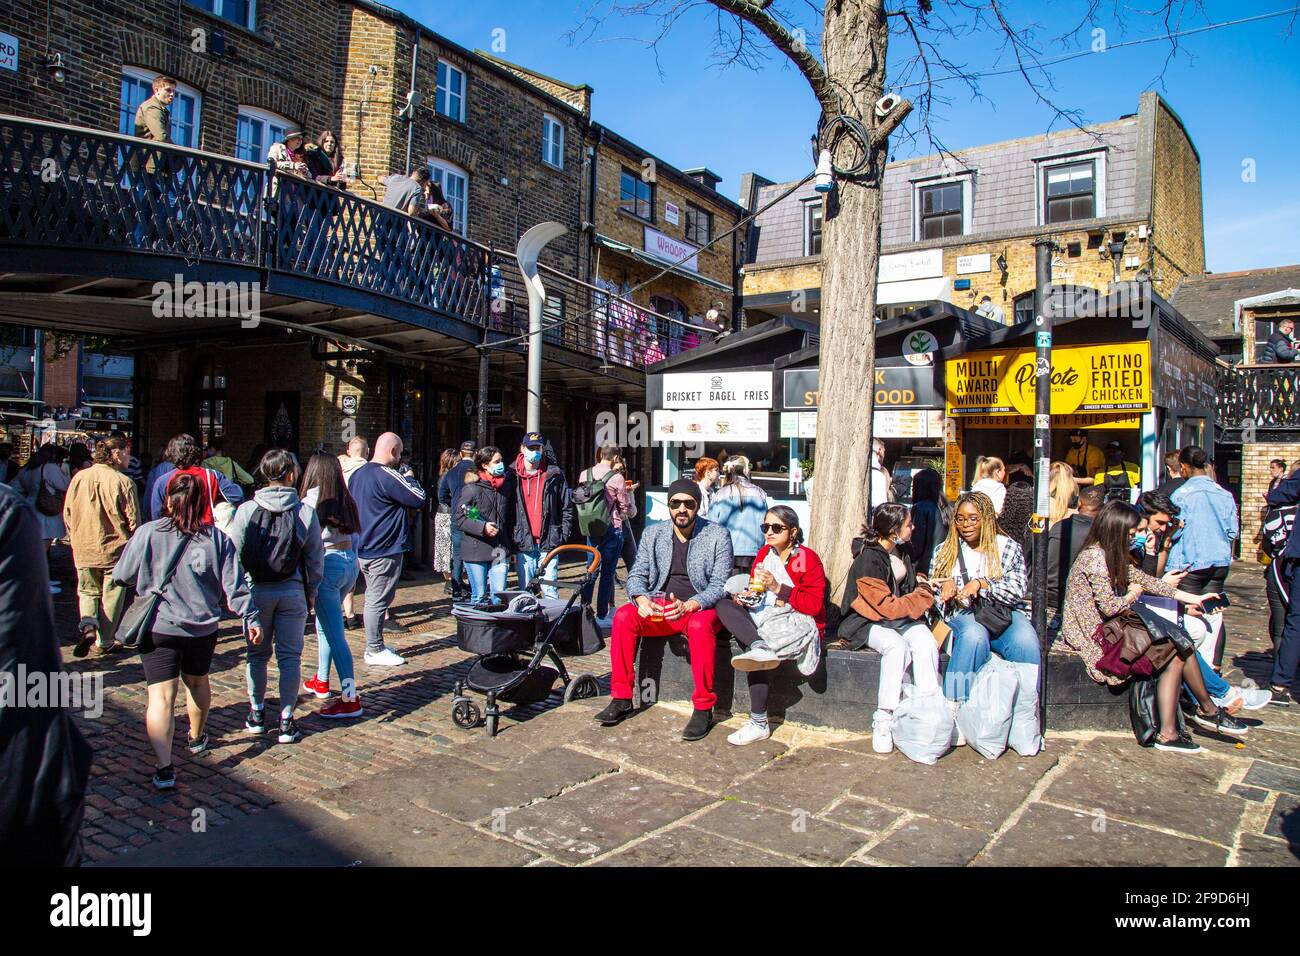 17th April 2021 - London, UK, Camden Market attracted crowds on a sunny weekend after coronavirus pandemic lockdown easing Stock Photo